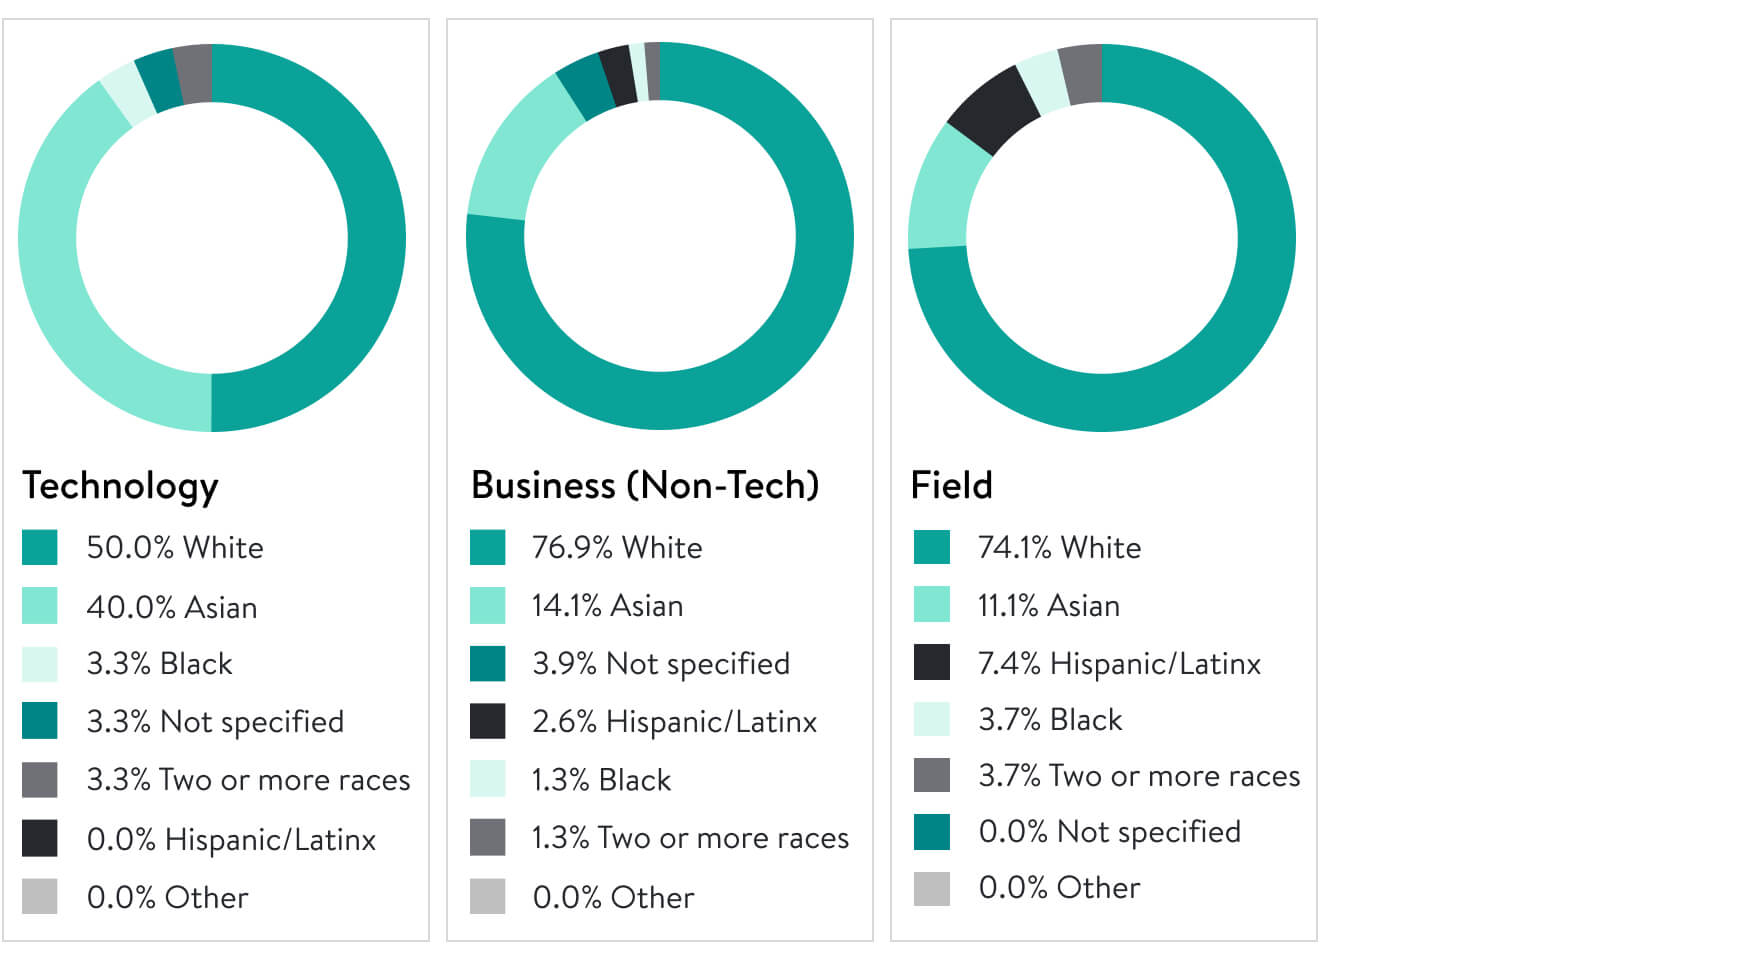 Three pie charts, displaying Leadership Racial/Ethnic Representation in Technology, Business (non-Tech), and Field Departments.